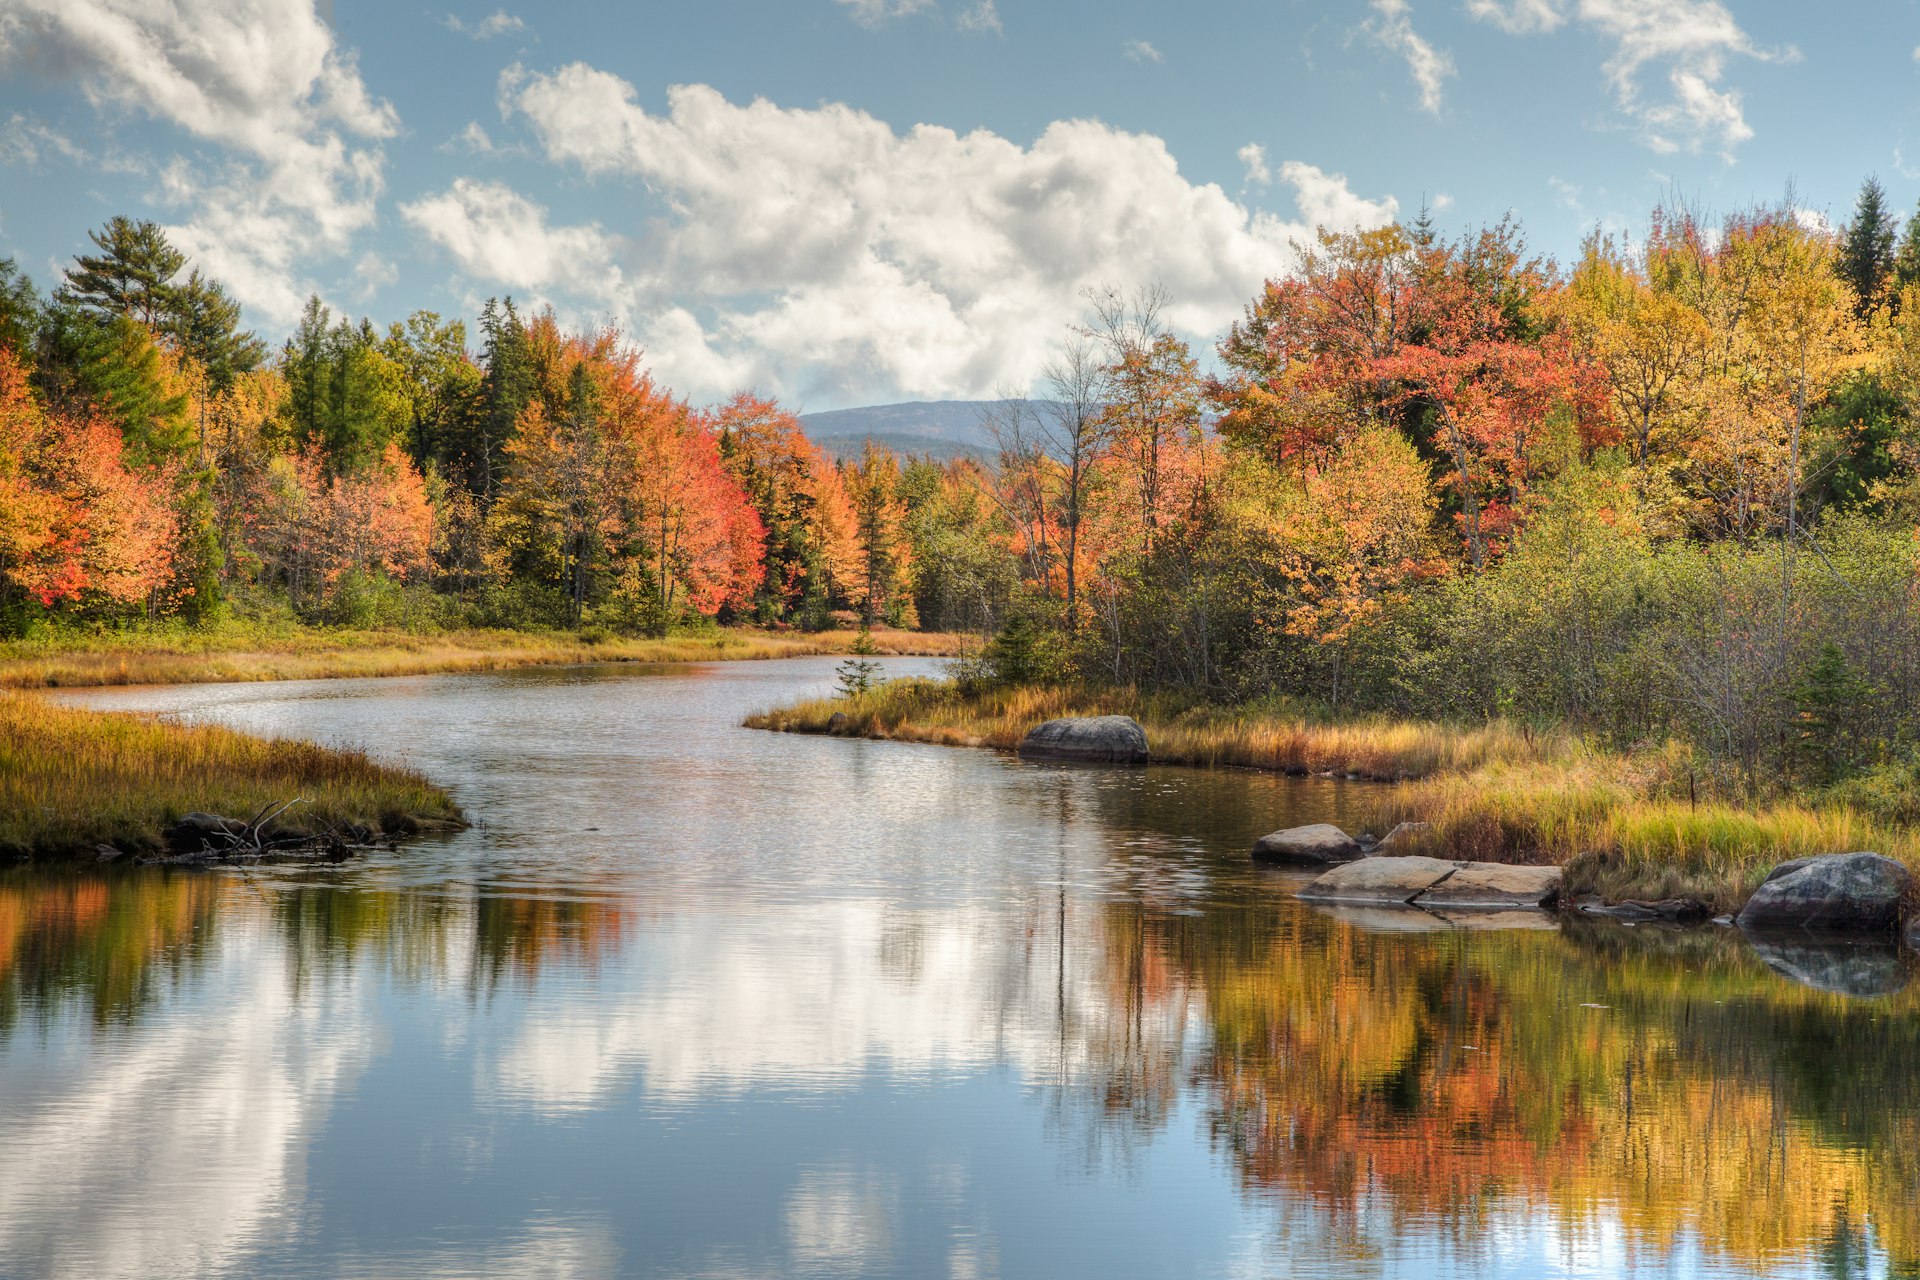 Maine River with Colorful Fall Foliage